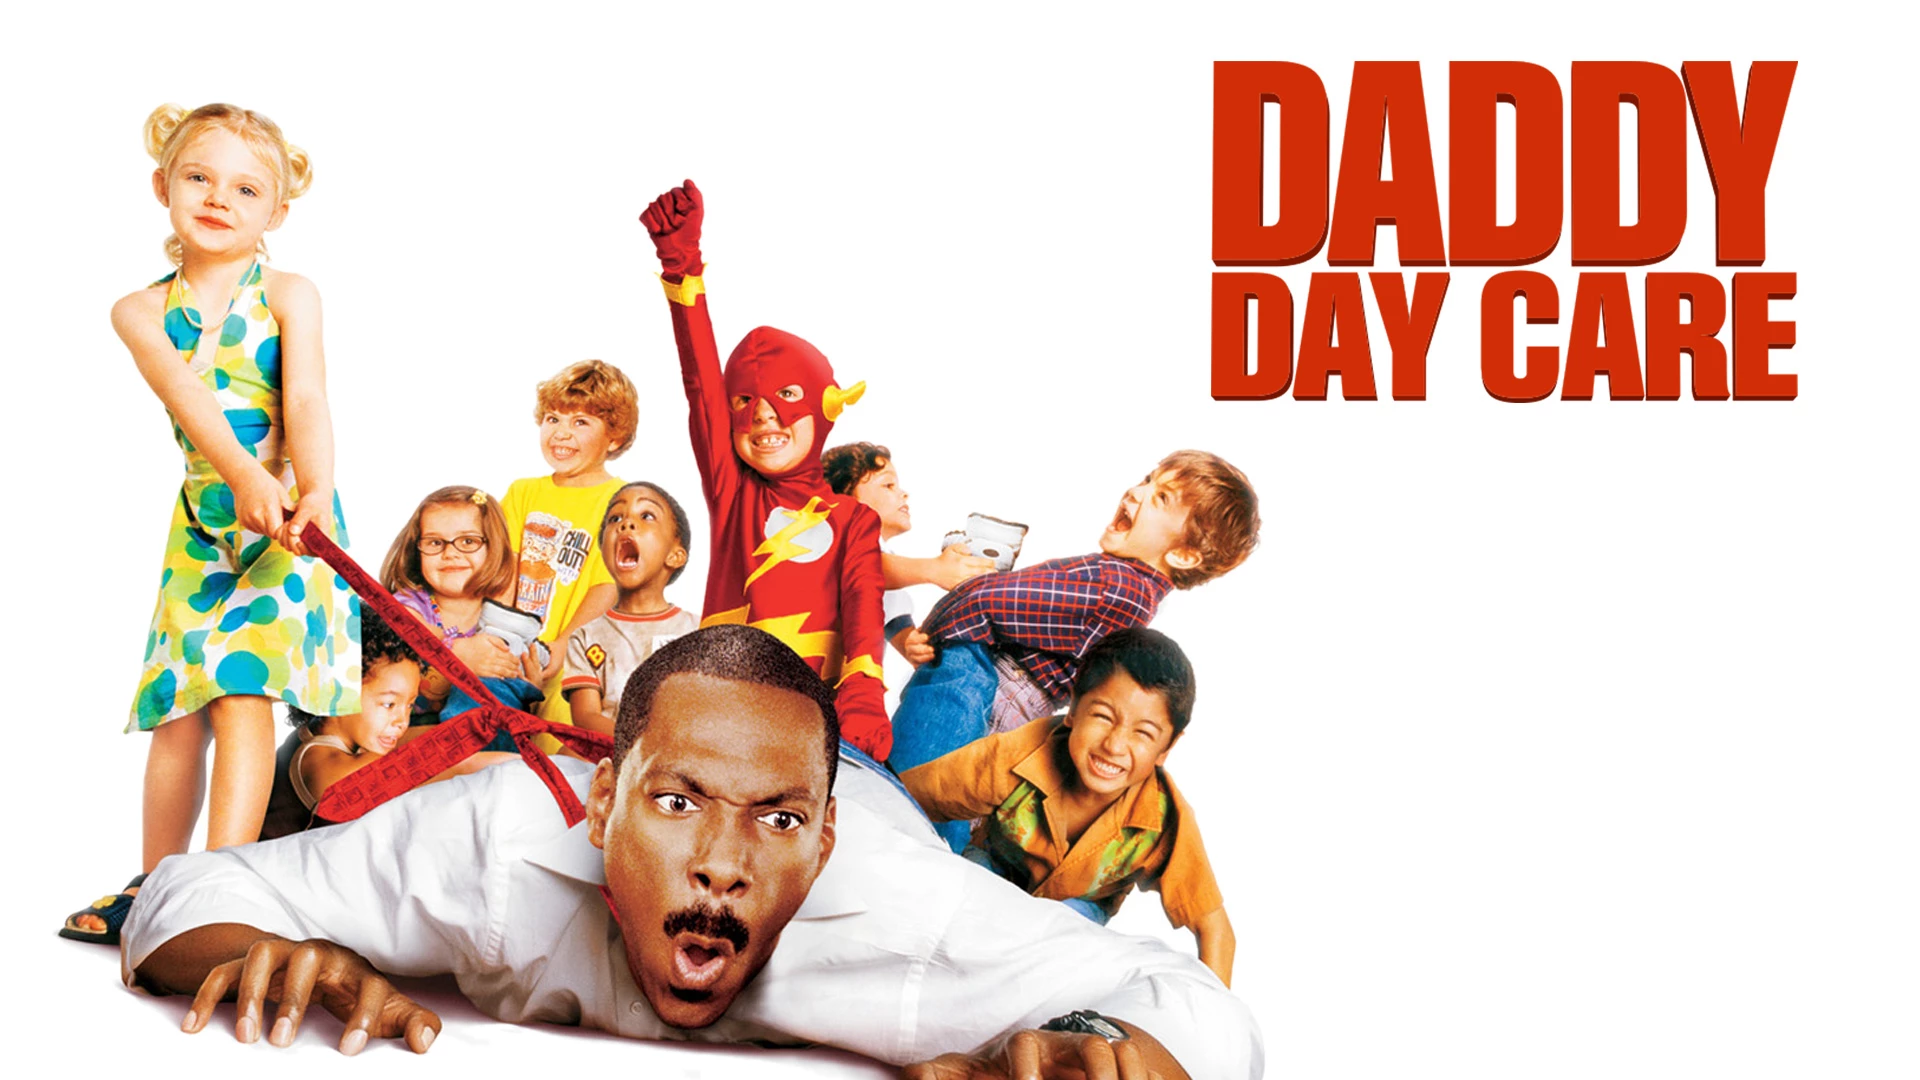 movies like Grown Ups - "Daddy Day Care" (2003)